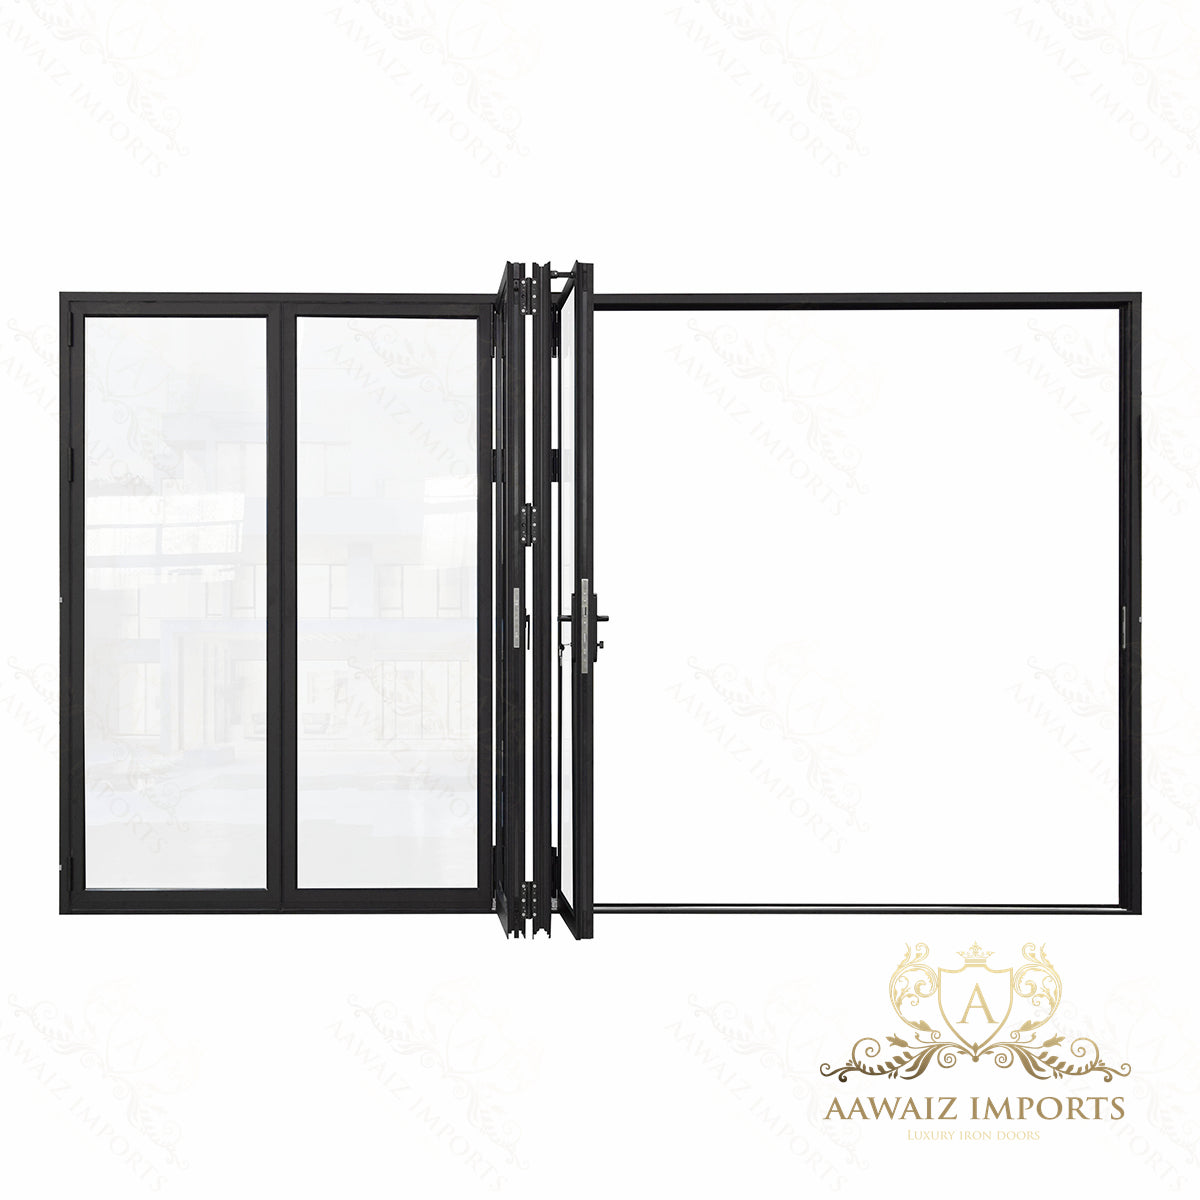 14 Ft Wide By 8 Ft Tall (168" By 96") Aluminum Bi Fold Patio Door Outswing  Thermal Break Insulated Matt Black Finish